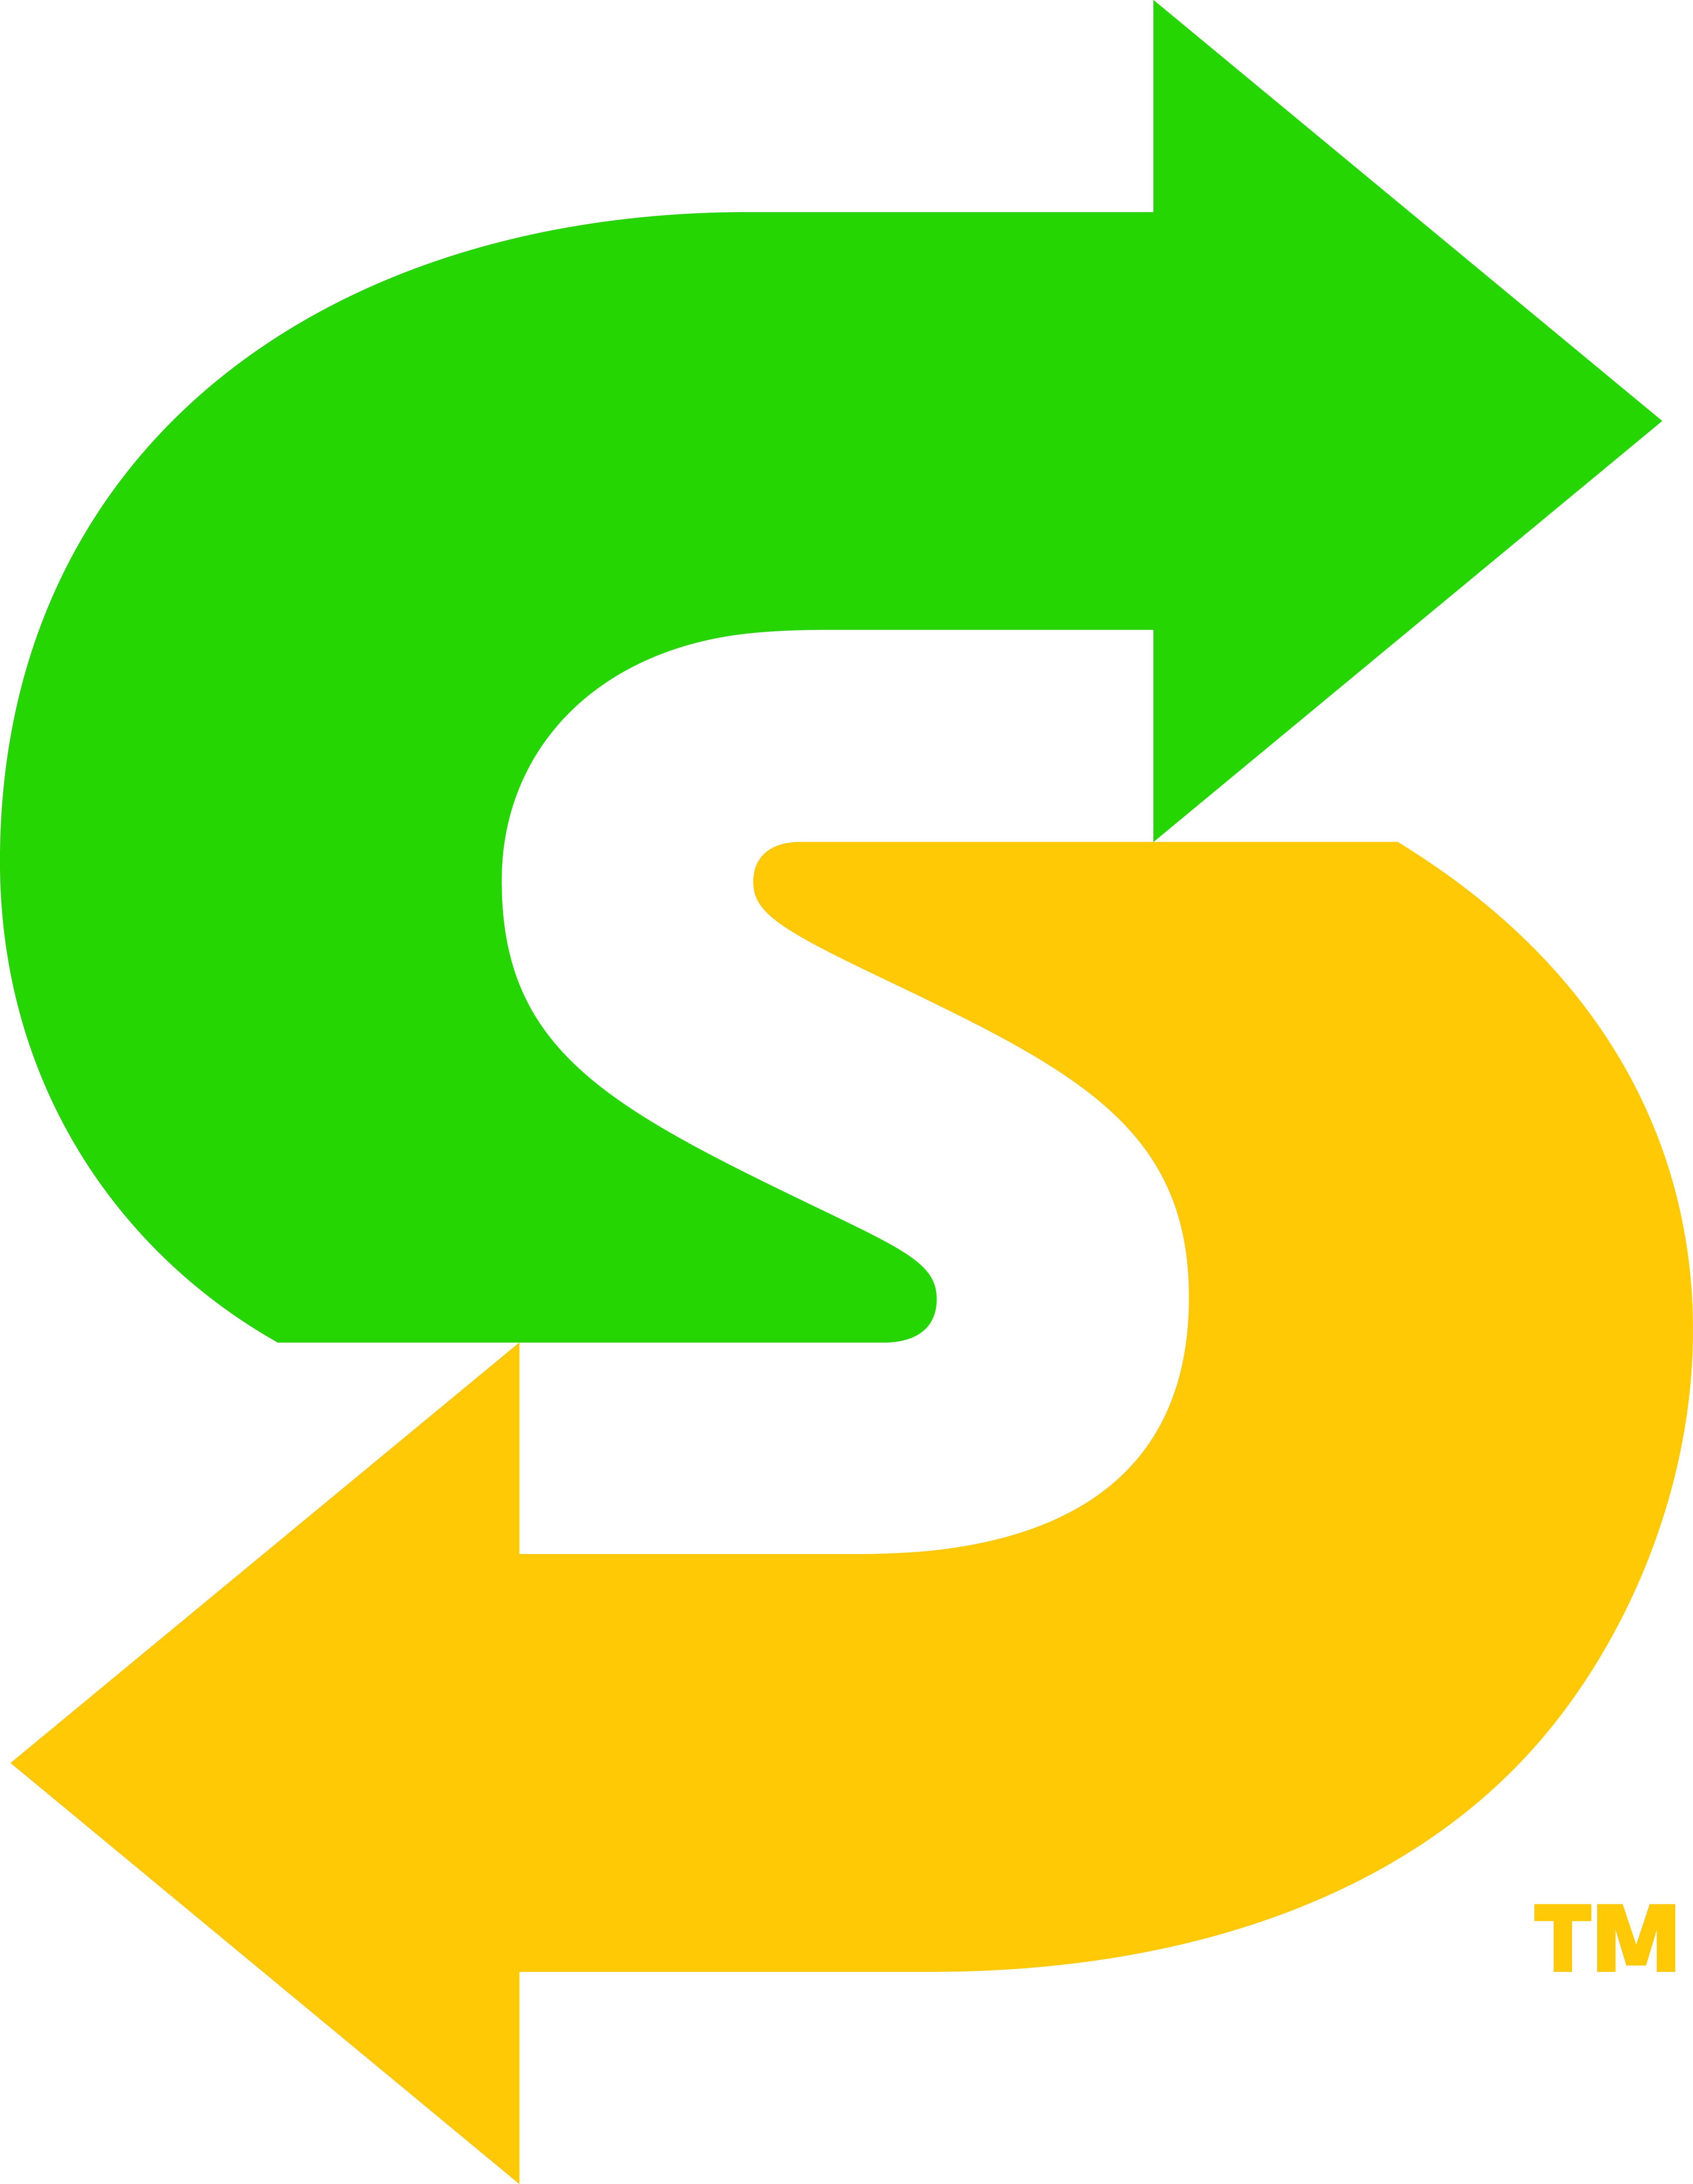 Subway Logo - Subway has a new logo for the first time in 15 years | Business Insider